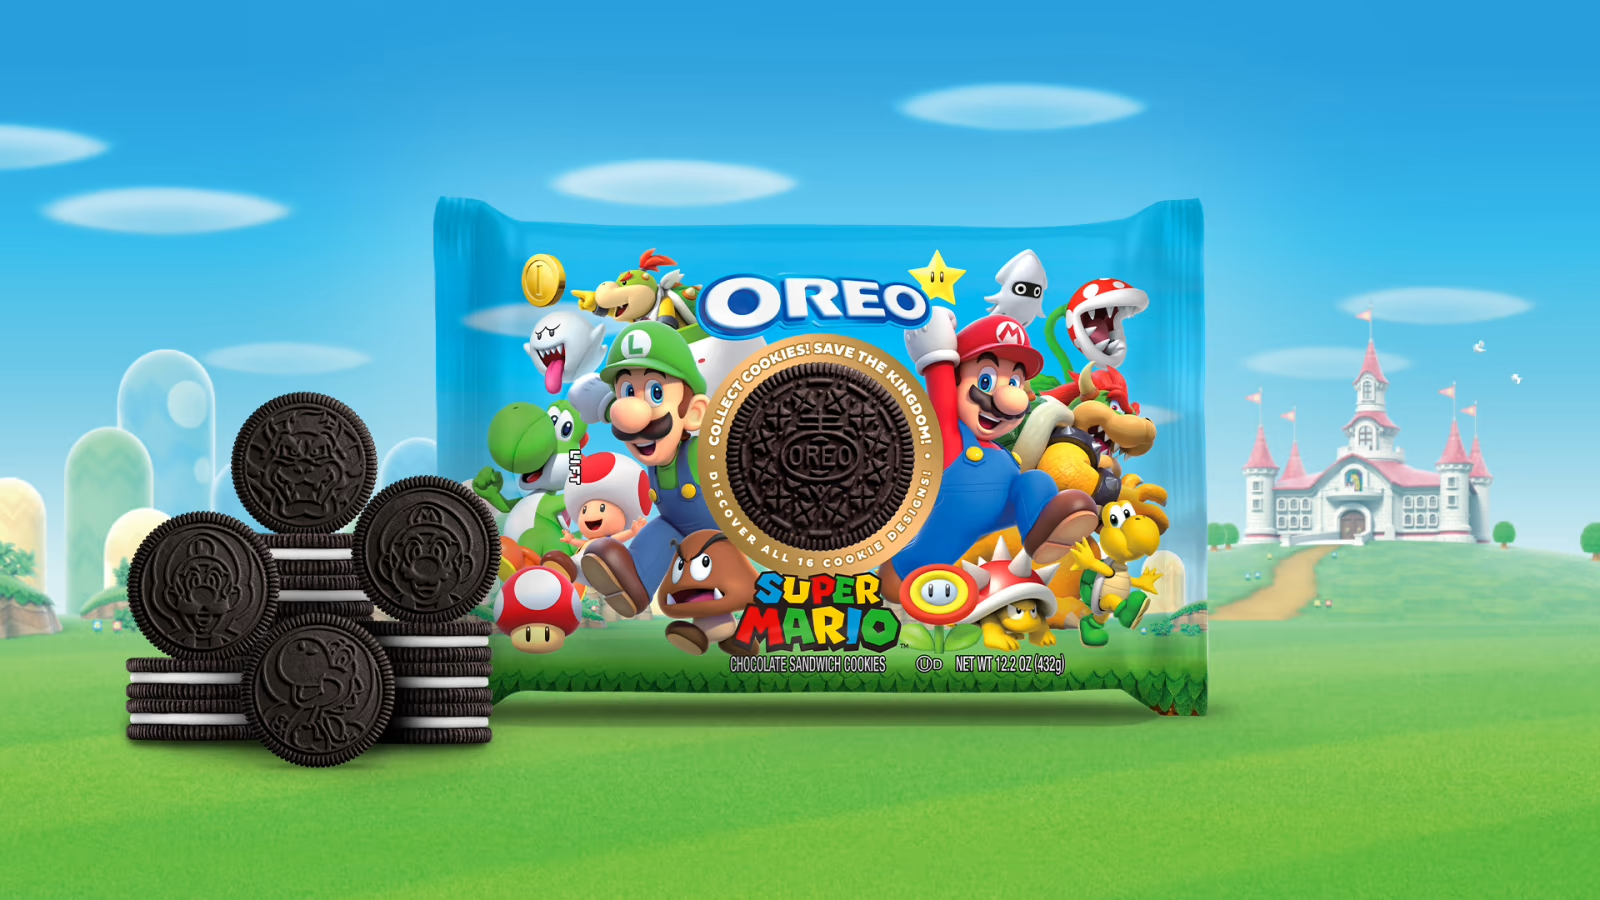 Boost Your Snack Game with Limited-Edition Super Mario-Inspired OREO Cookies